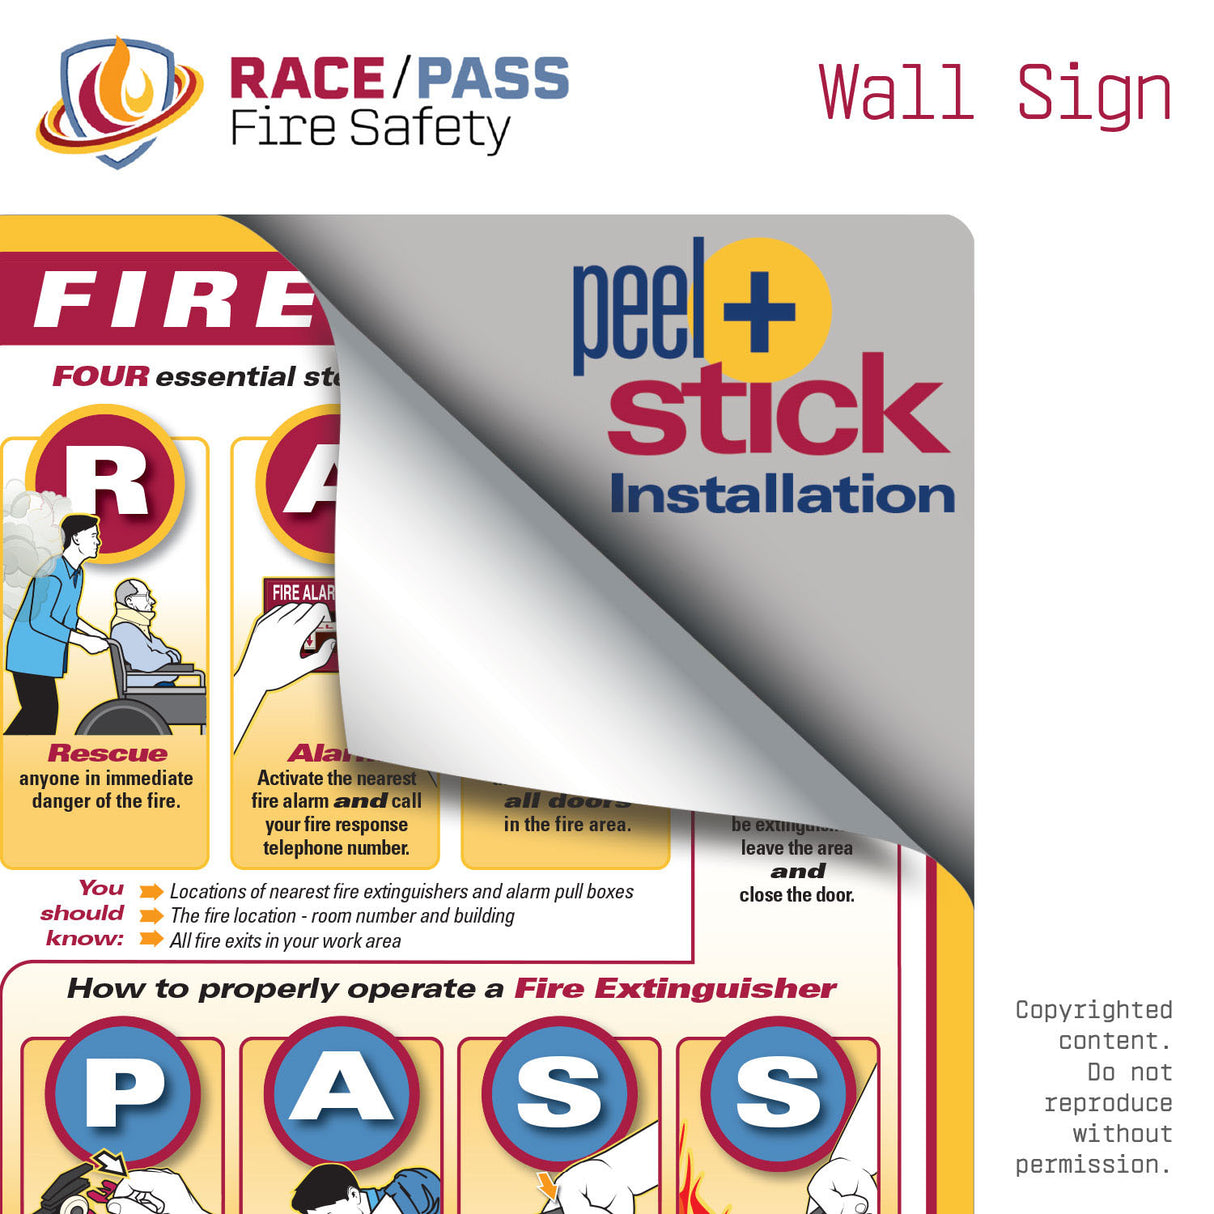 Our RACE/PASS Fire Safety Wall Sign is printed on our exclusive RestiX®️ peel & stick repositionable vinyl.  It is easy for anyone to install and reposition.